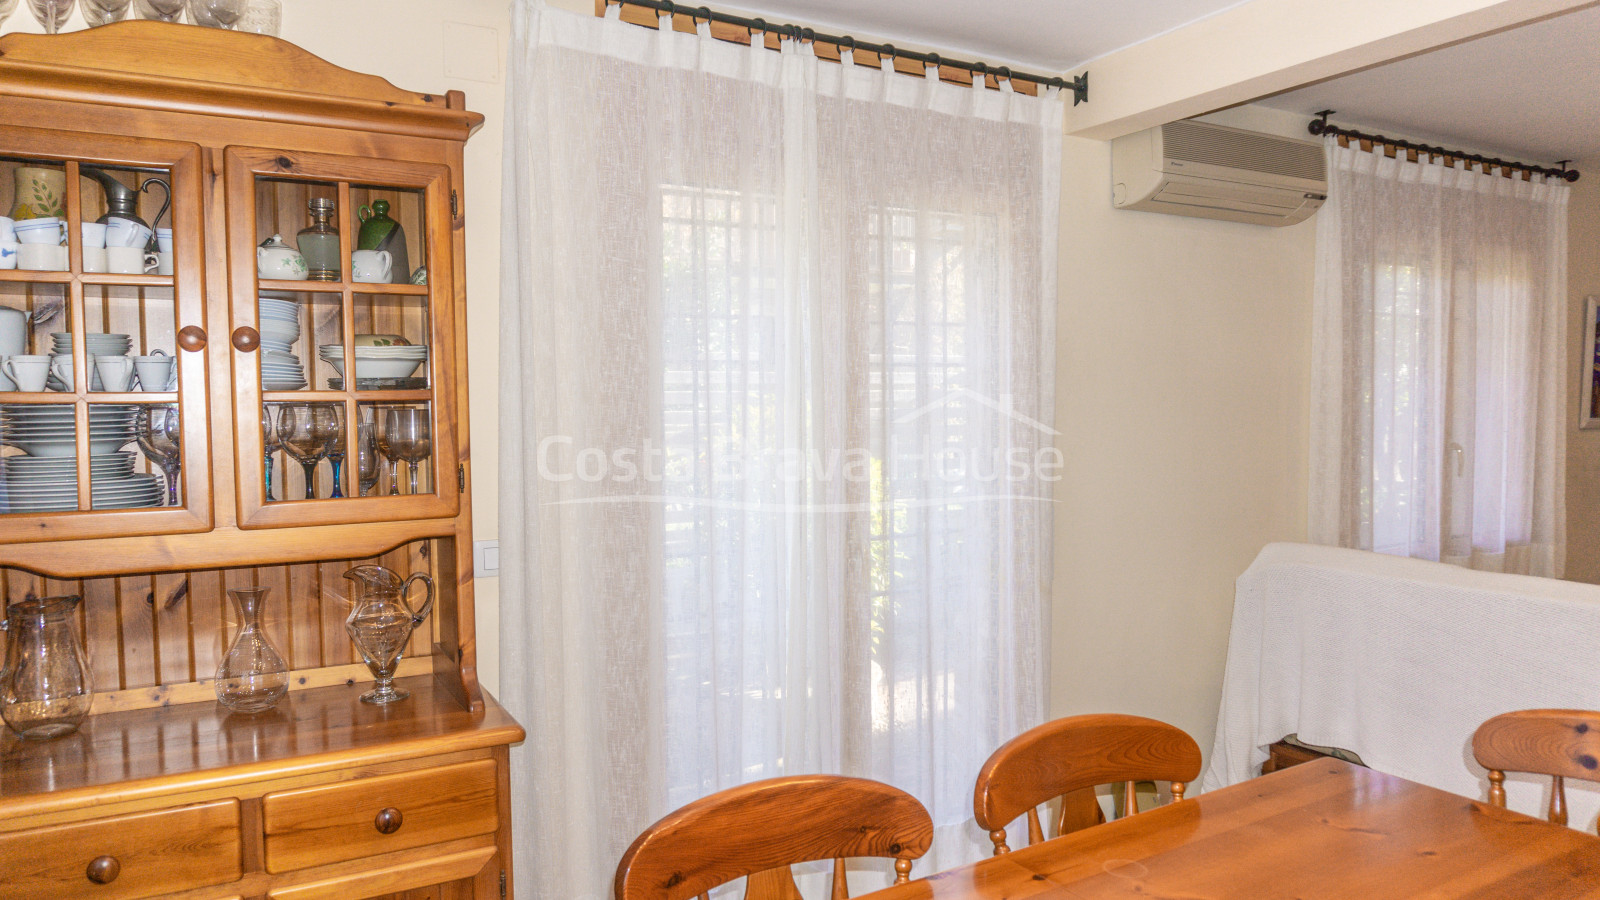 House for sale in Calella Palafrugell 10 min from the beach, in an attractive community with pool